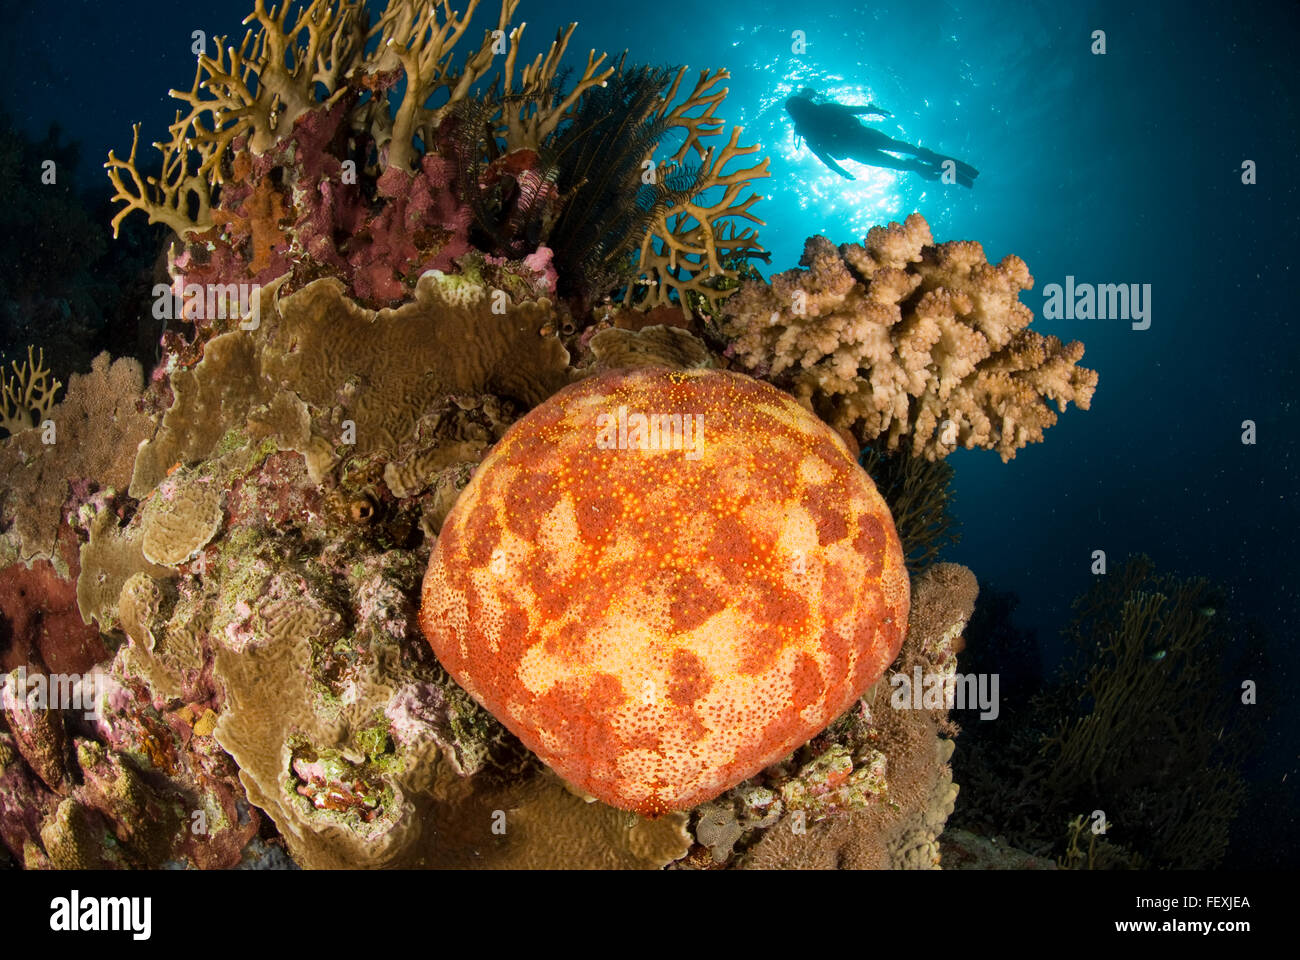 Pin Cushion Starfish amongst corals and diver Stock Photo